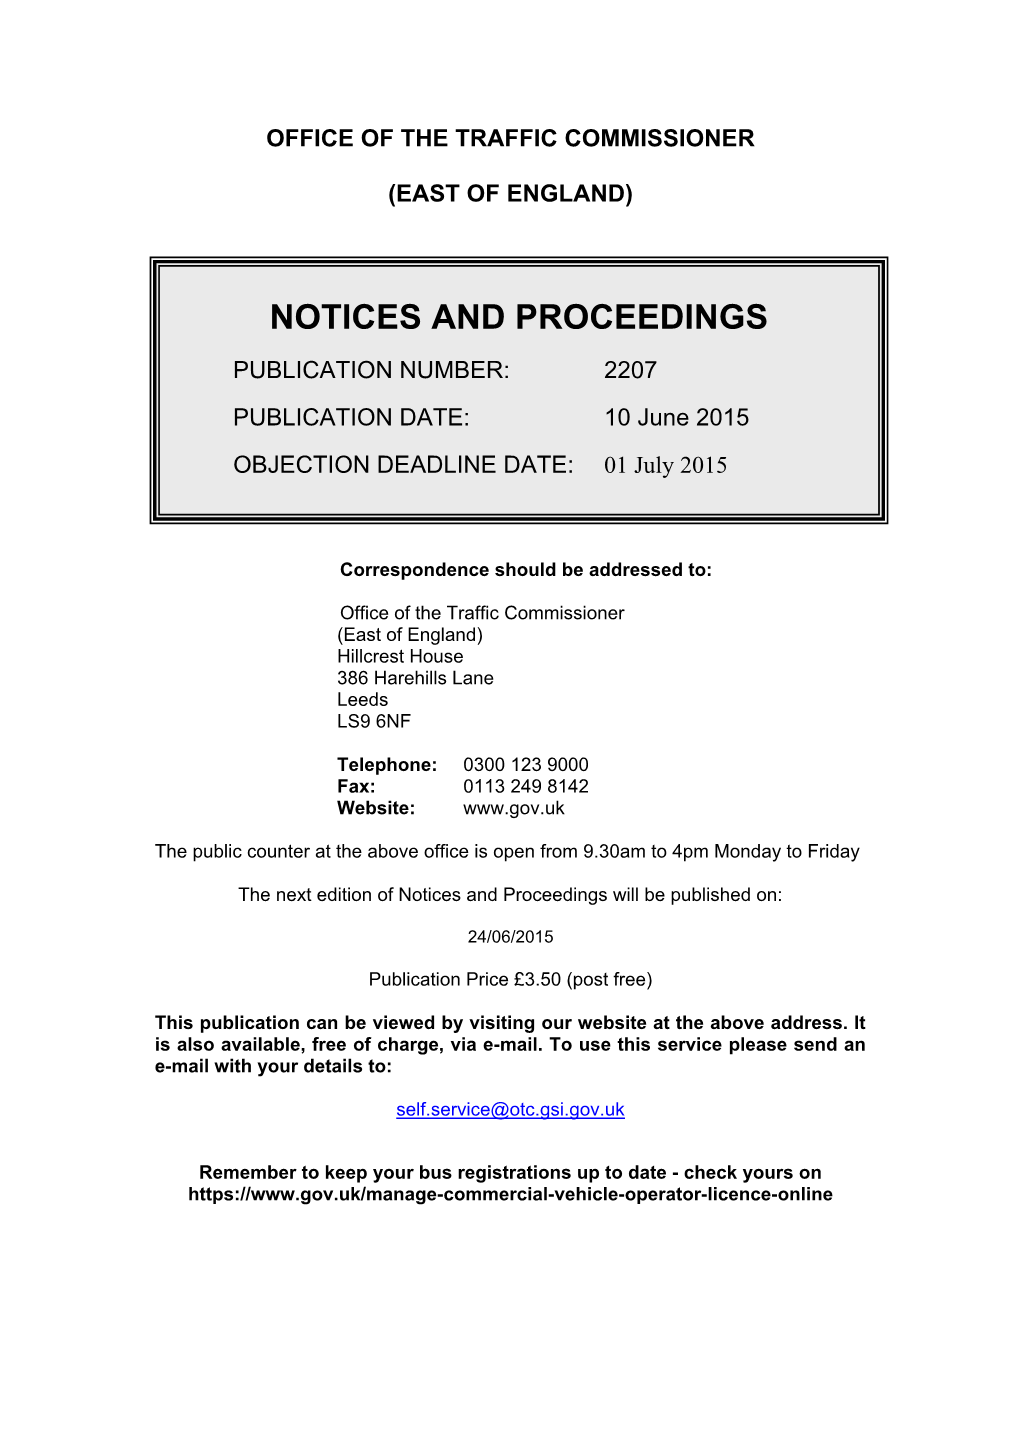 Notices and Proceedings: East of England: 10 June 2015